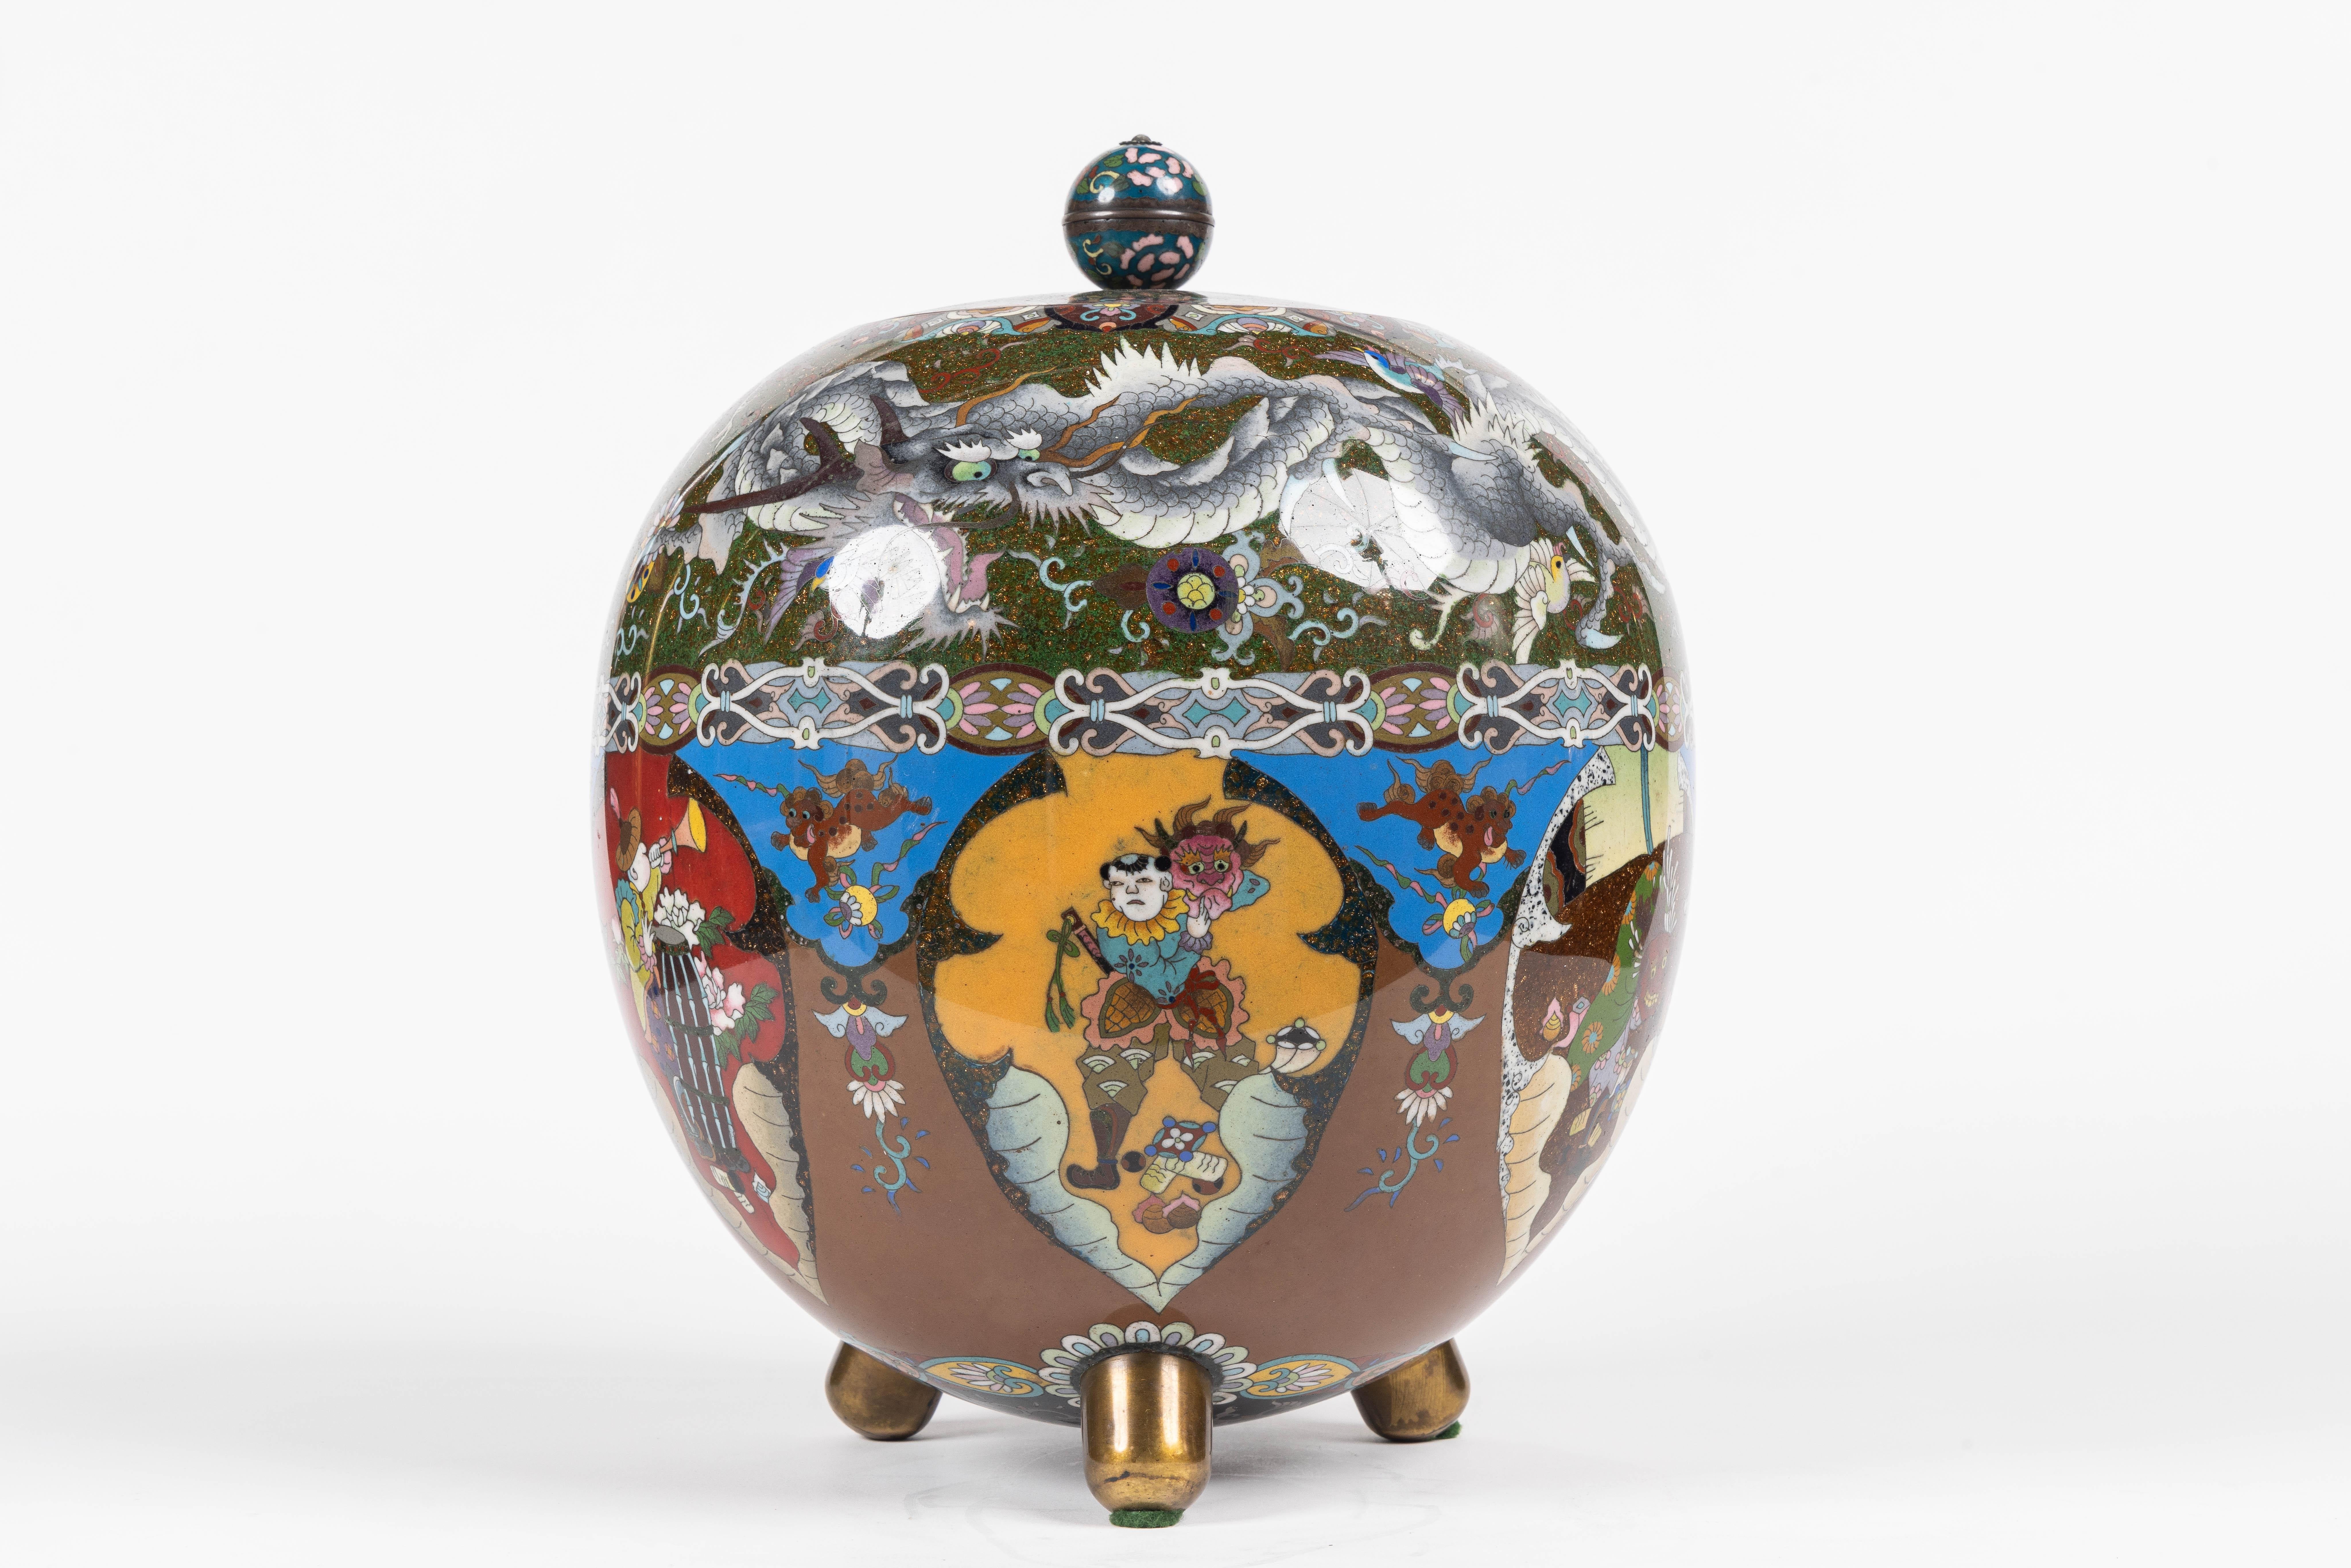 Majestic Japanese Cloisonne Enamel Covered Jar with Dragons, Theater Characters  For Sale 1